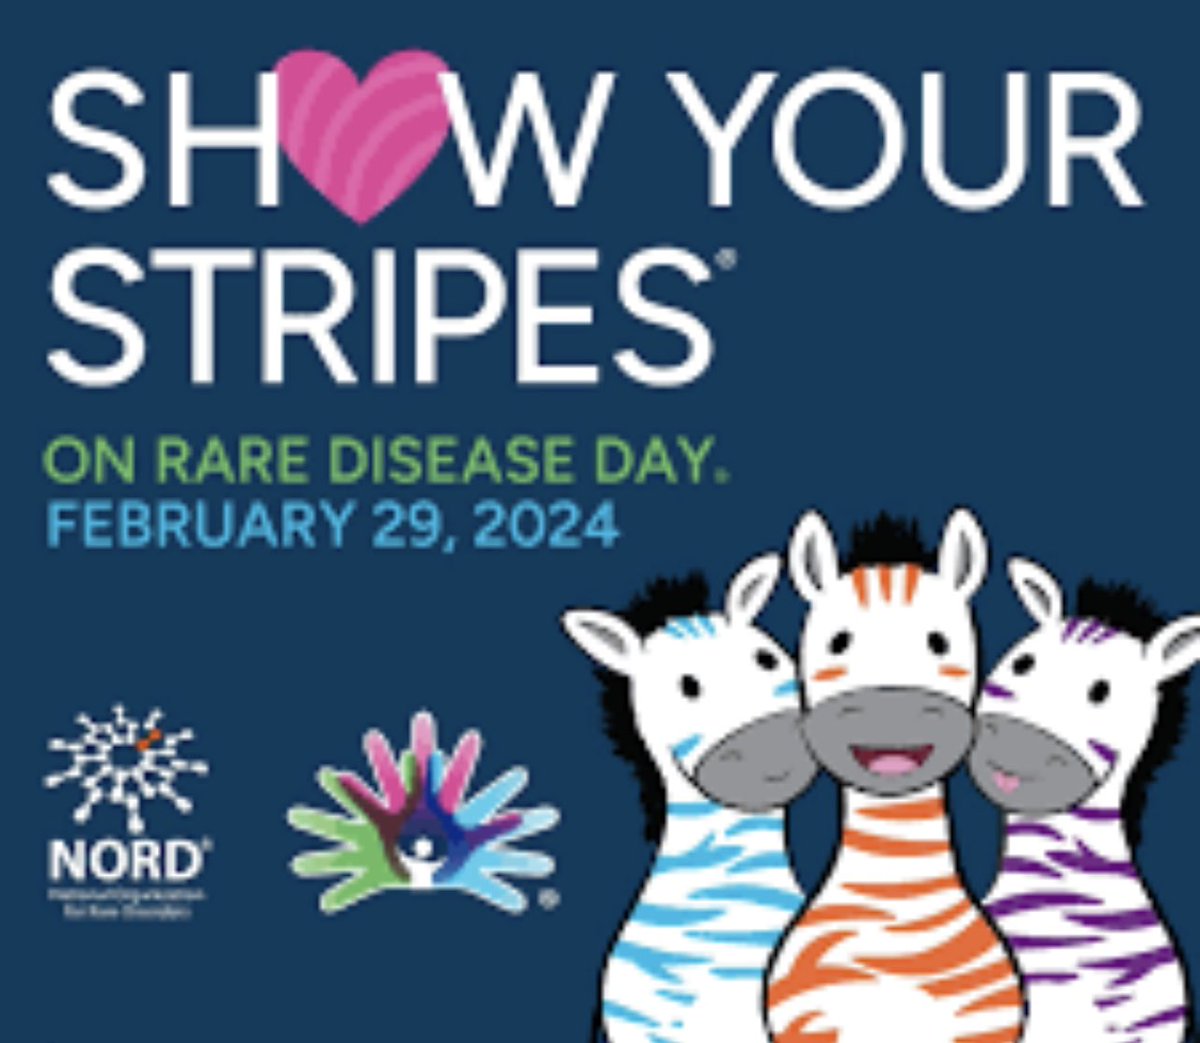 I have 3 genetic conditions: Common Variable Immune Deficiency (CVID), Autoimmune Polyendocrinopathy Syndrome Type 1 (APS1), hemochromatosis. Doctors are taught to 'think horses' when a patient presents with symptoms. I had to fight for 'think zebra' answers.
#RareDiseaseDay2024